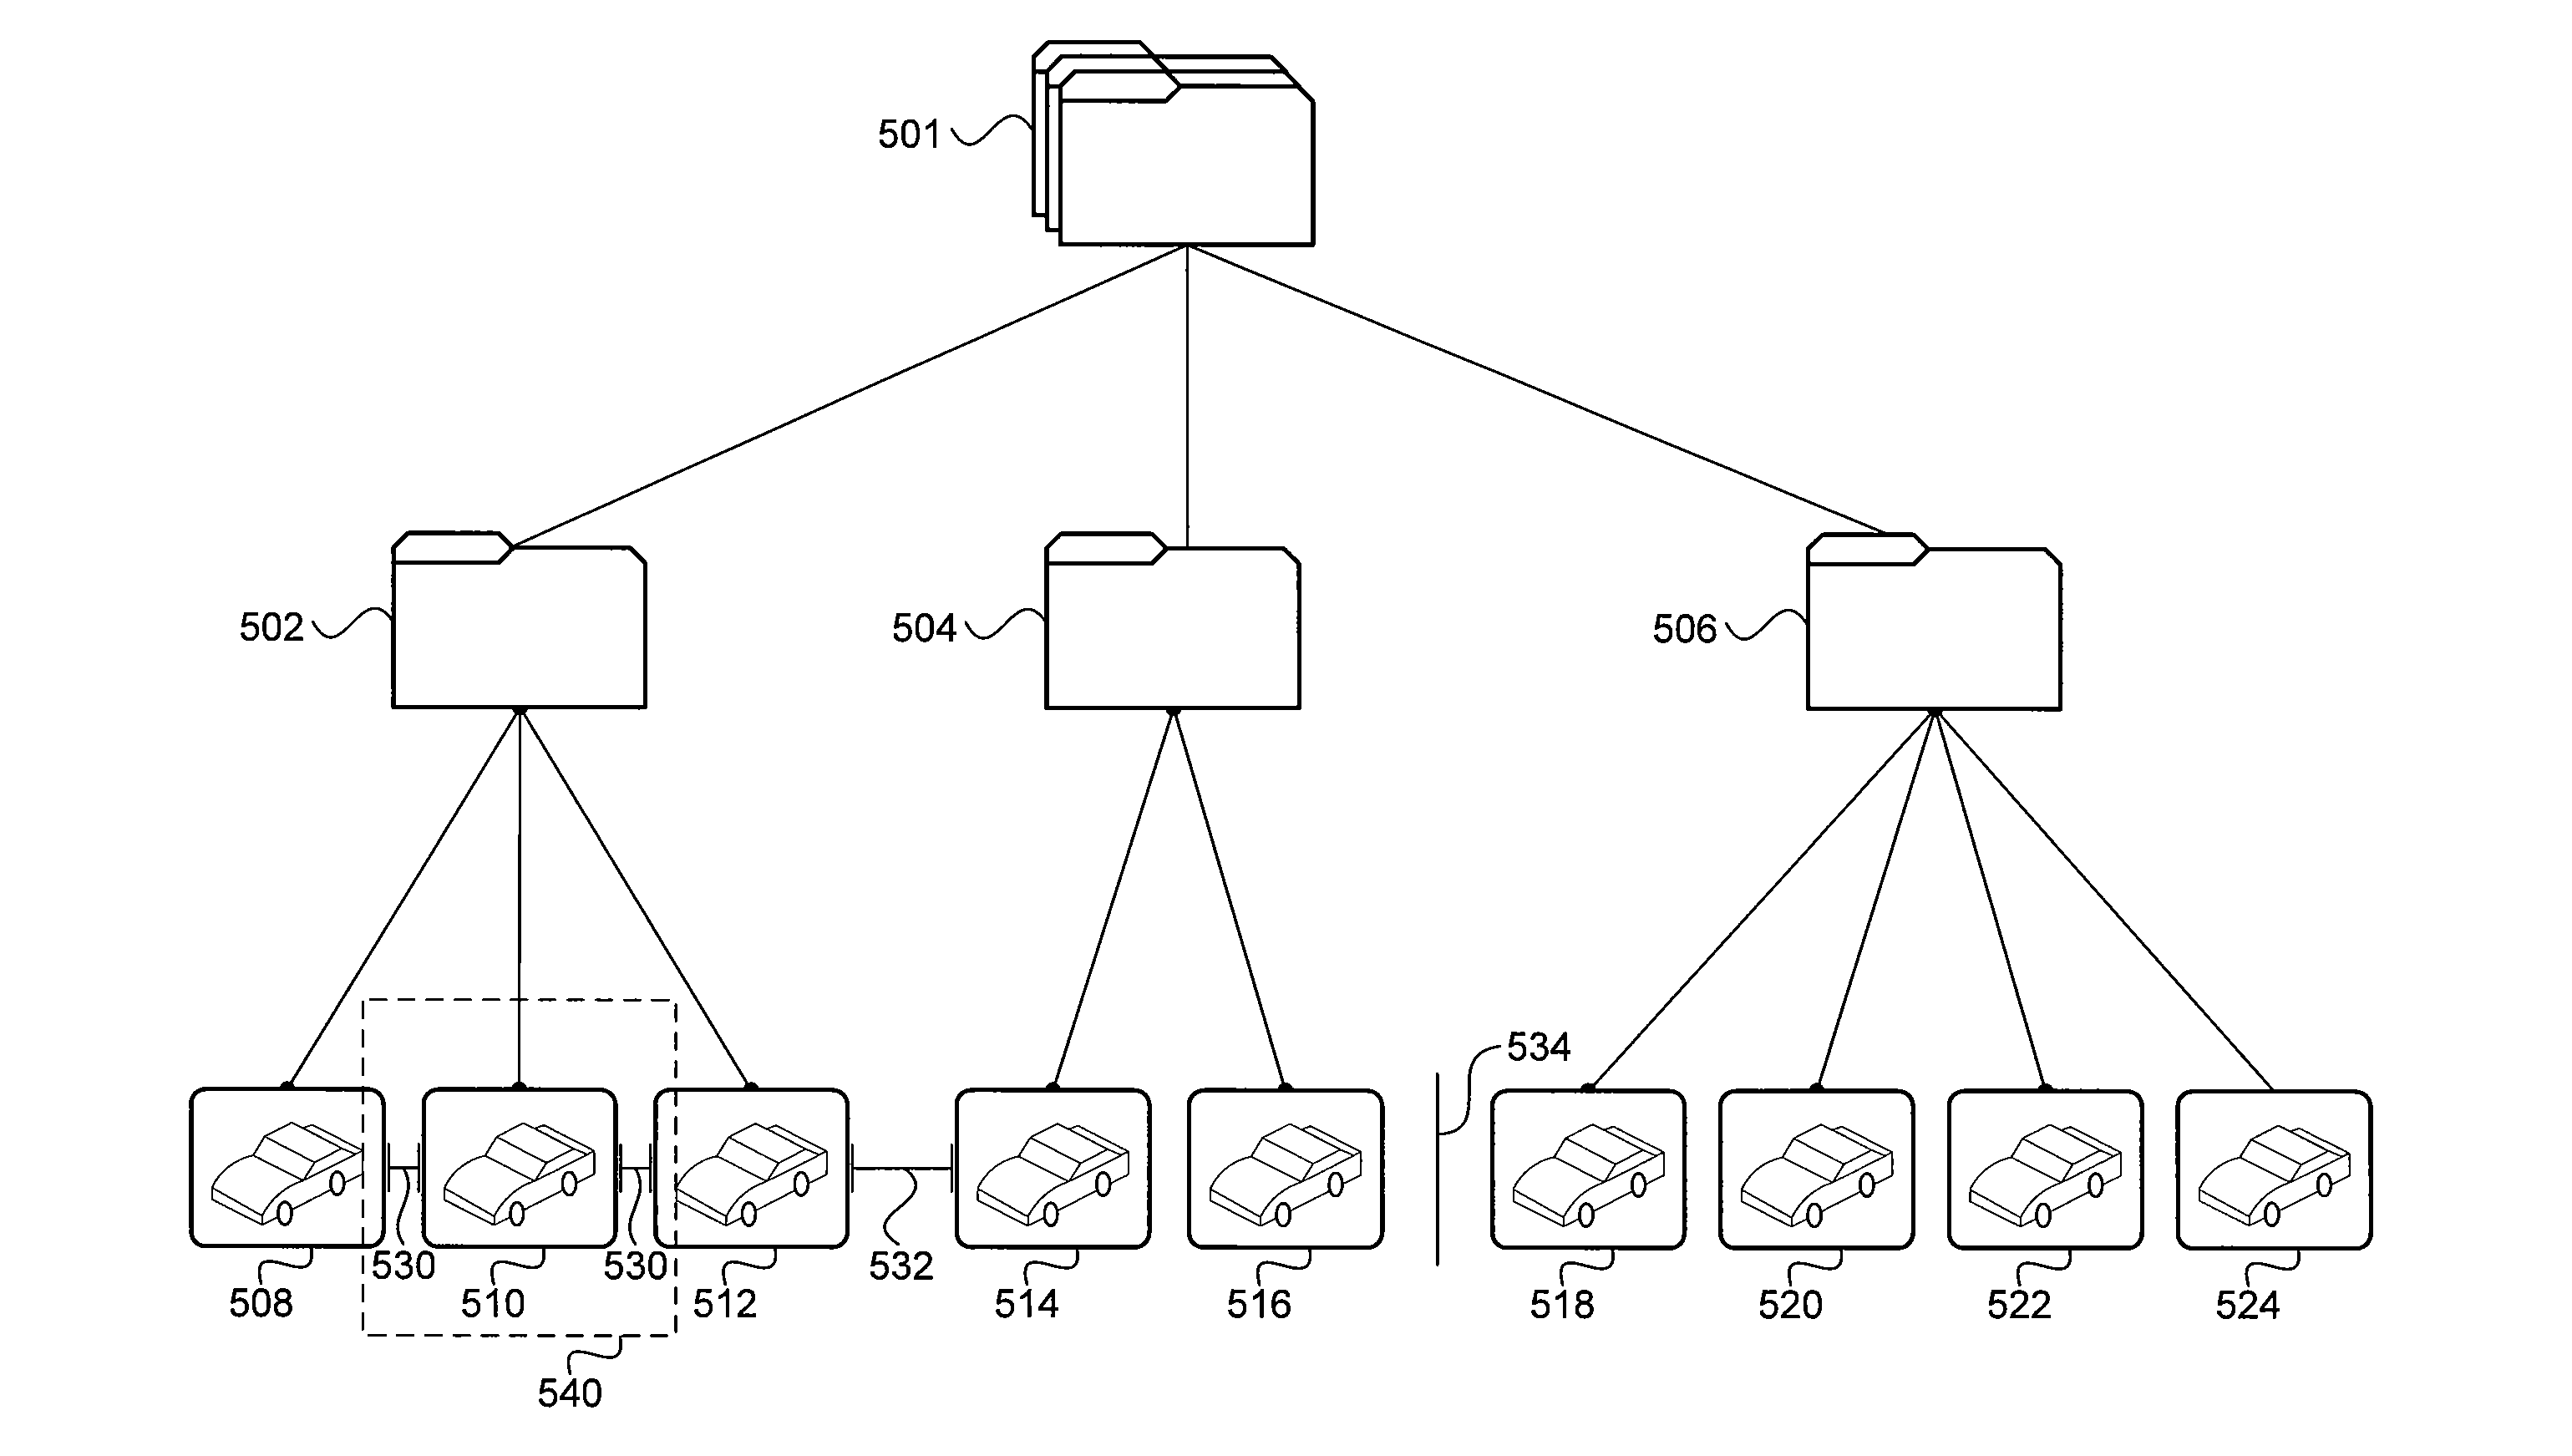 One-Dimensional Representation of a Two-Dimensional Data Structure